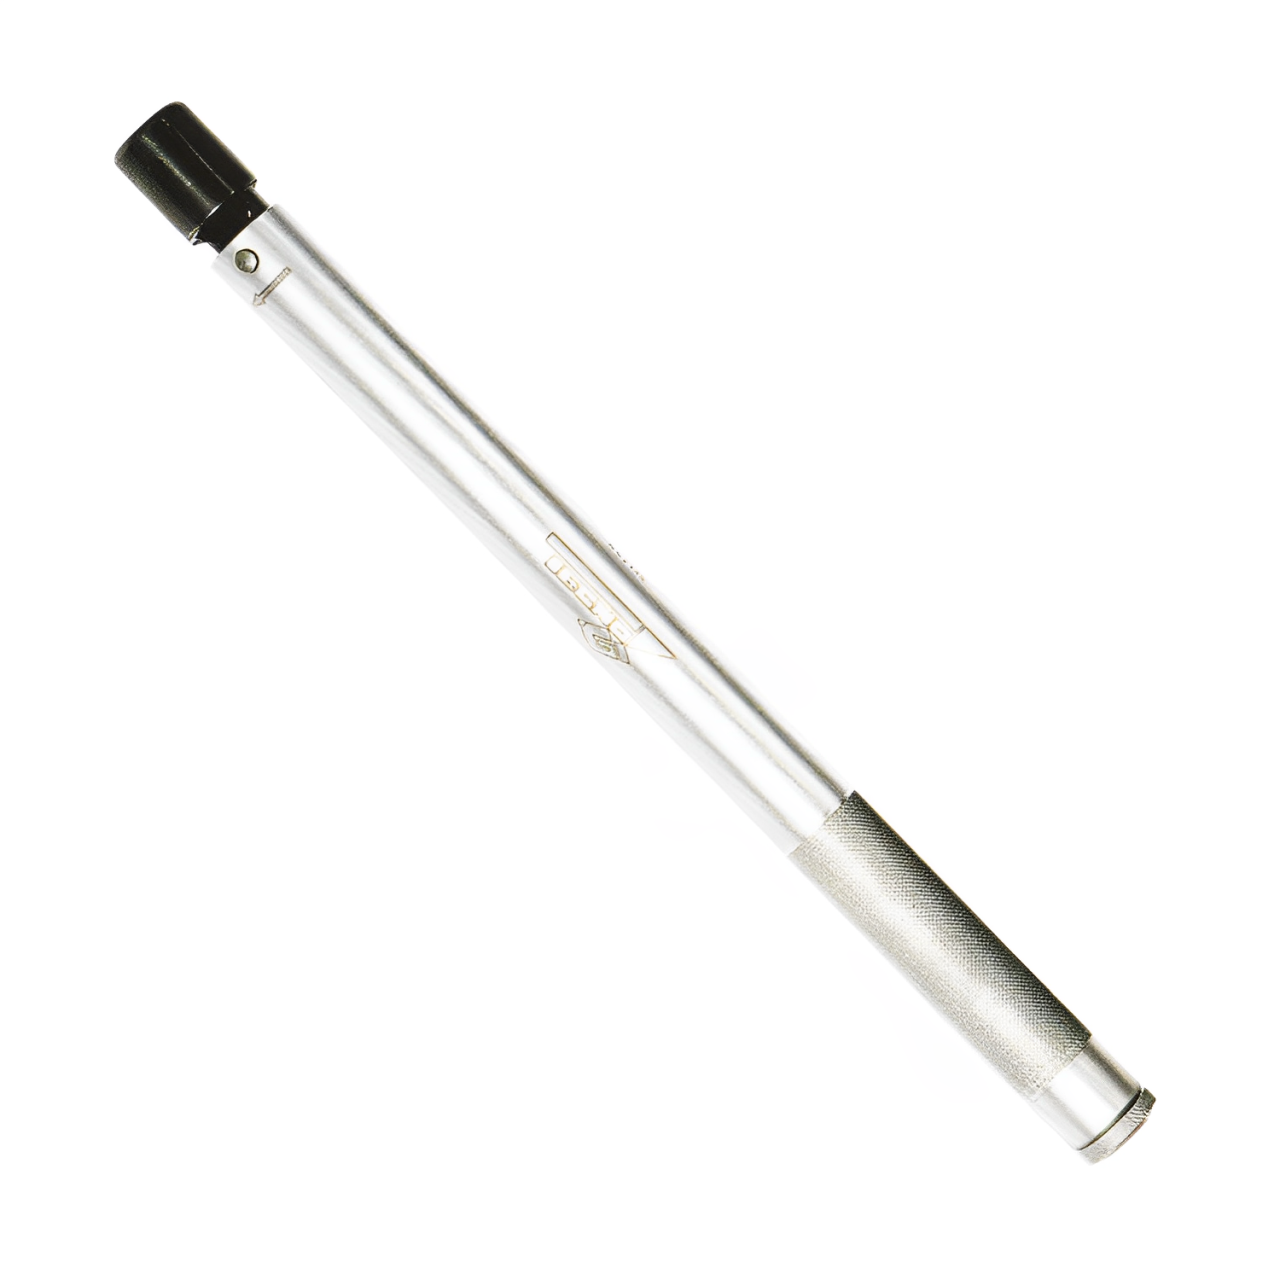 TECNOGI 602T Torque Wrench For Production Lines 10 - 60 Nm - Premium Torque Wrench from TECNOGI - Shop now at Yew Aik.